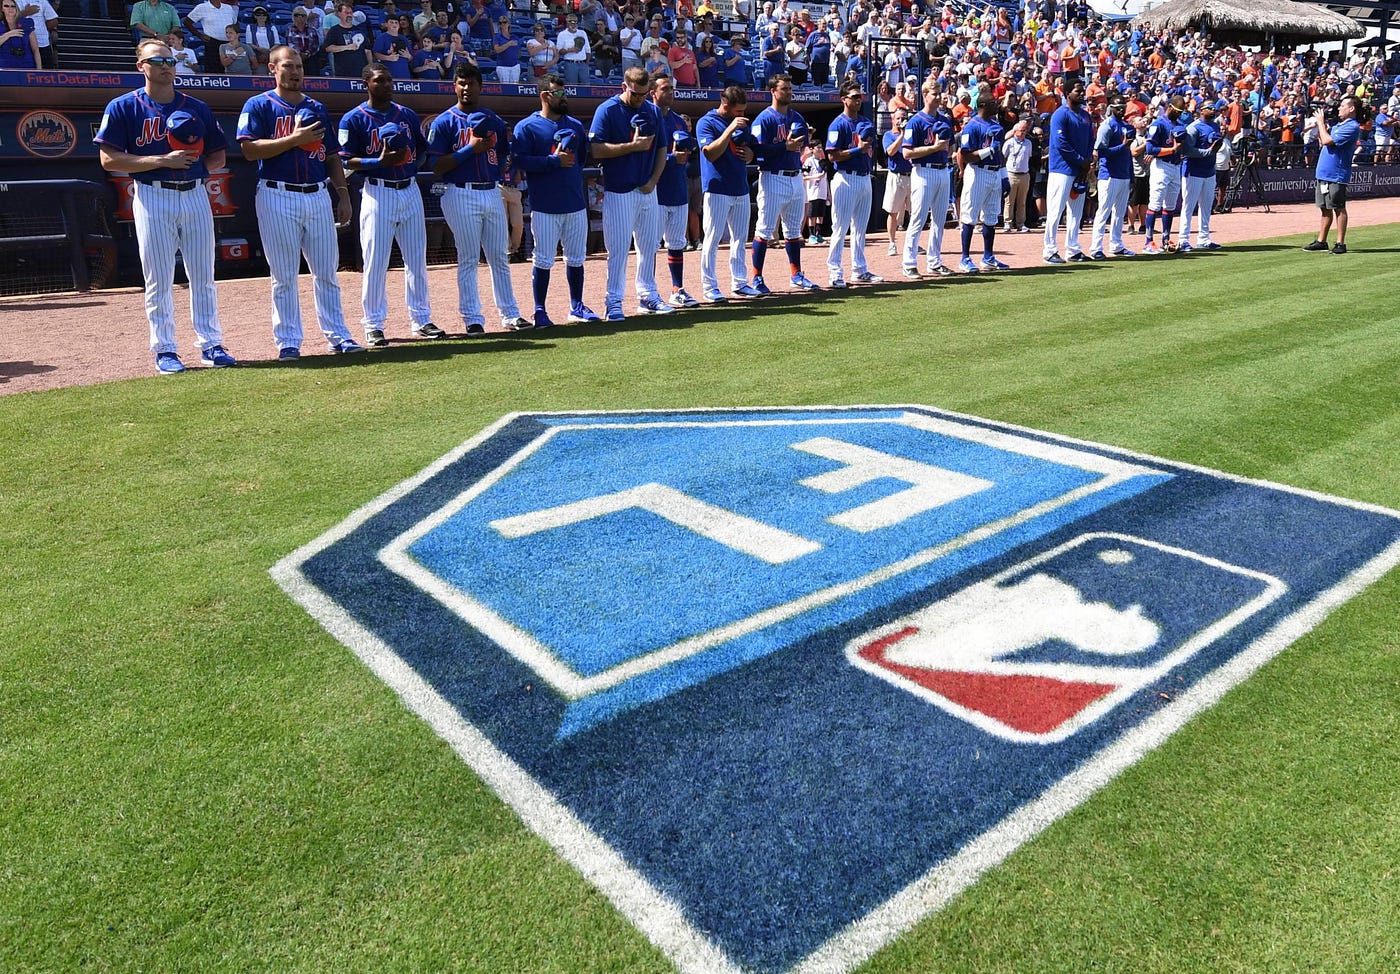 Blue Jays to open innovative spring training facility in 2020